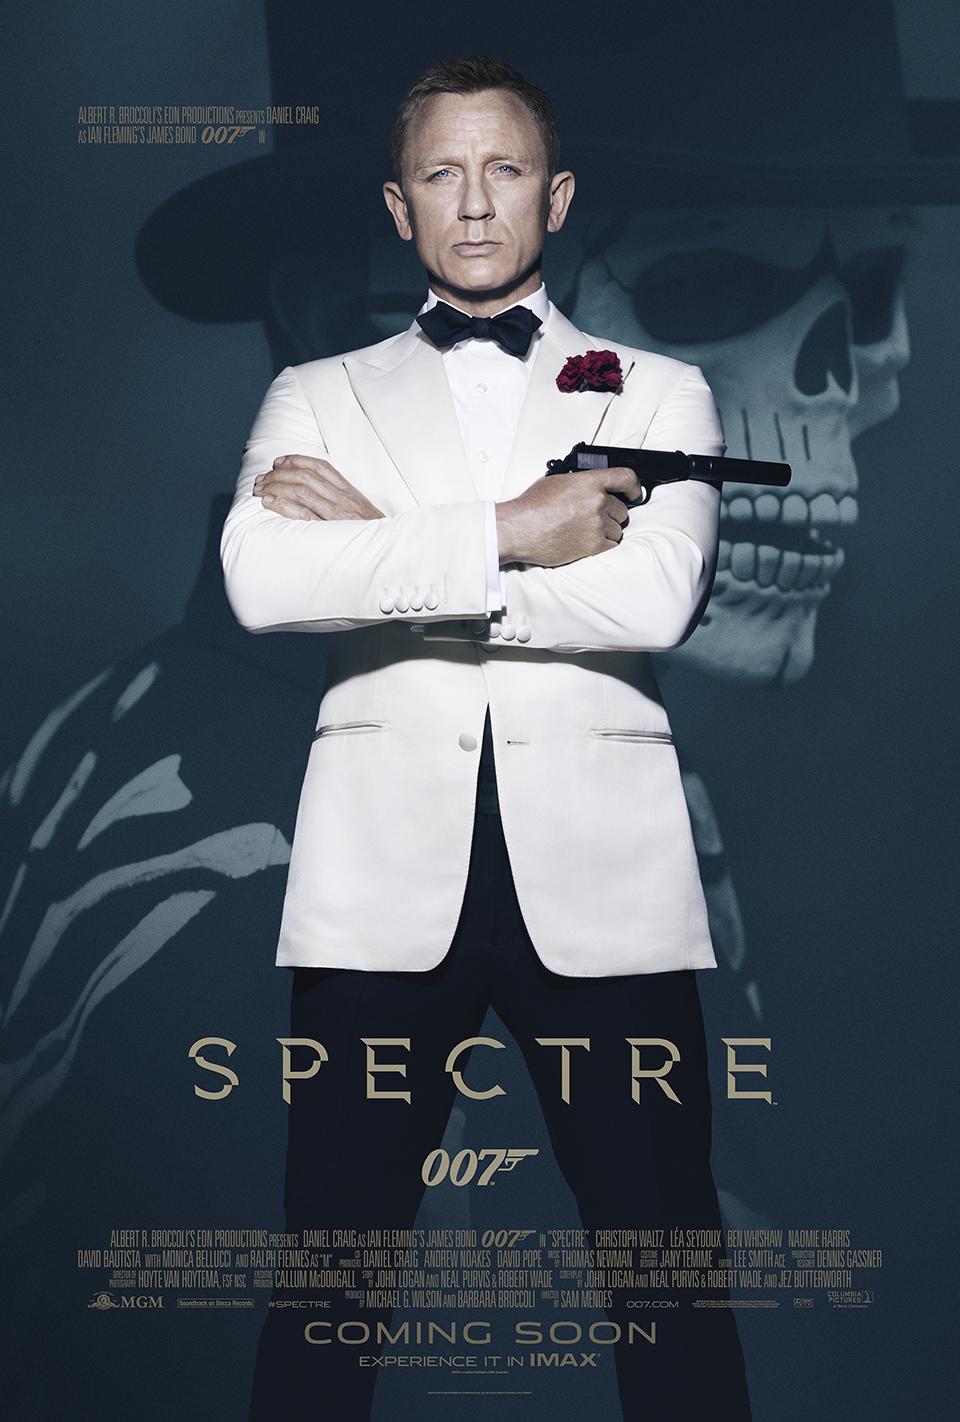 "Spectre" movie poster from MGM. Daniel Craig strikes a classic pose as Agent 007, dressed in a white tuxedo jacket and holding a Walther PPK .380 pistol with a silencer. Can you spot the poster's colossal blunder? 